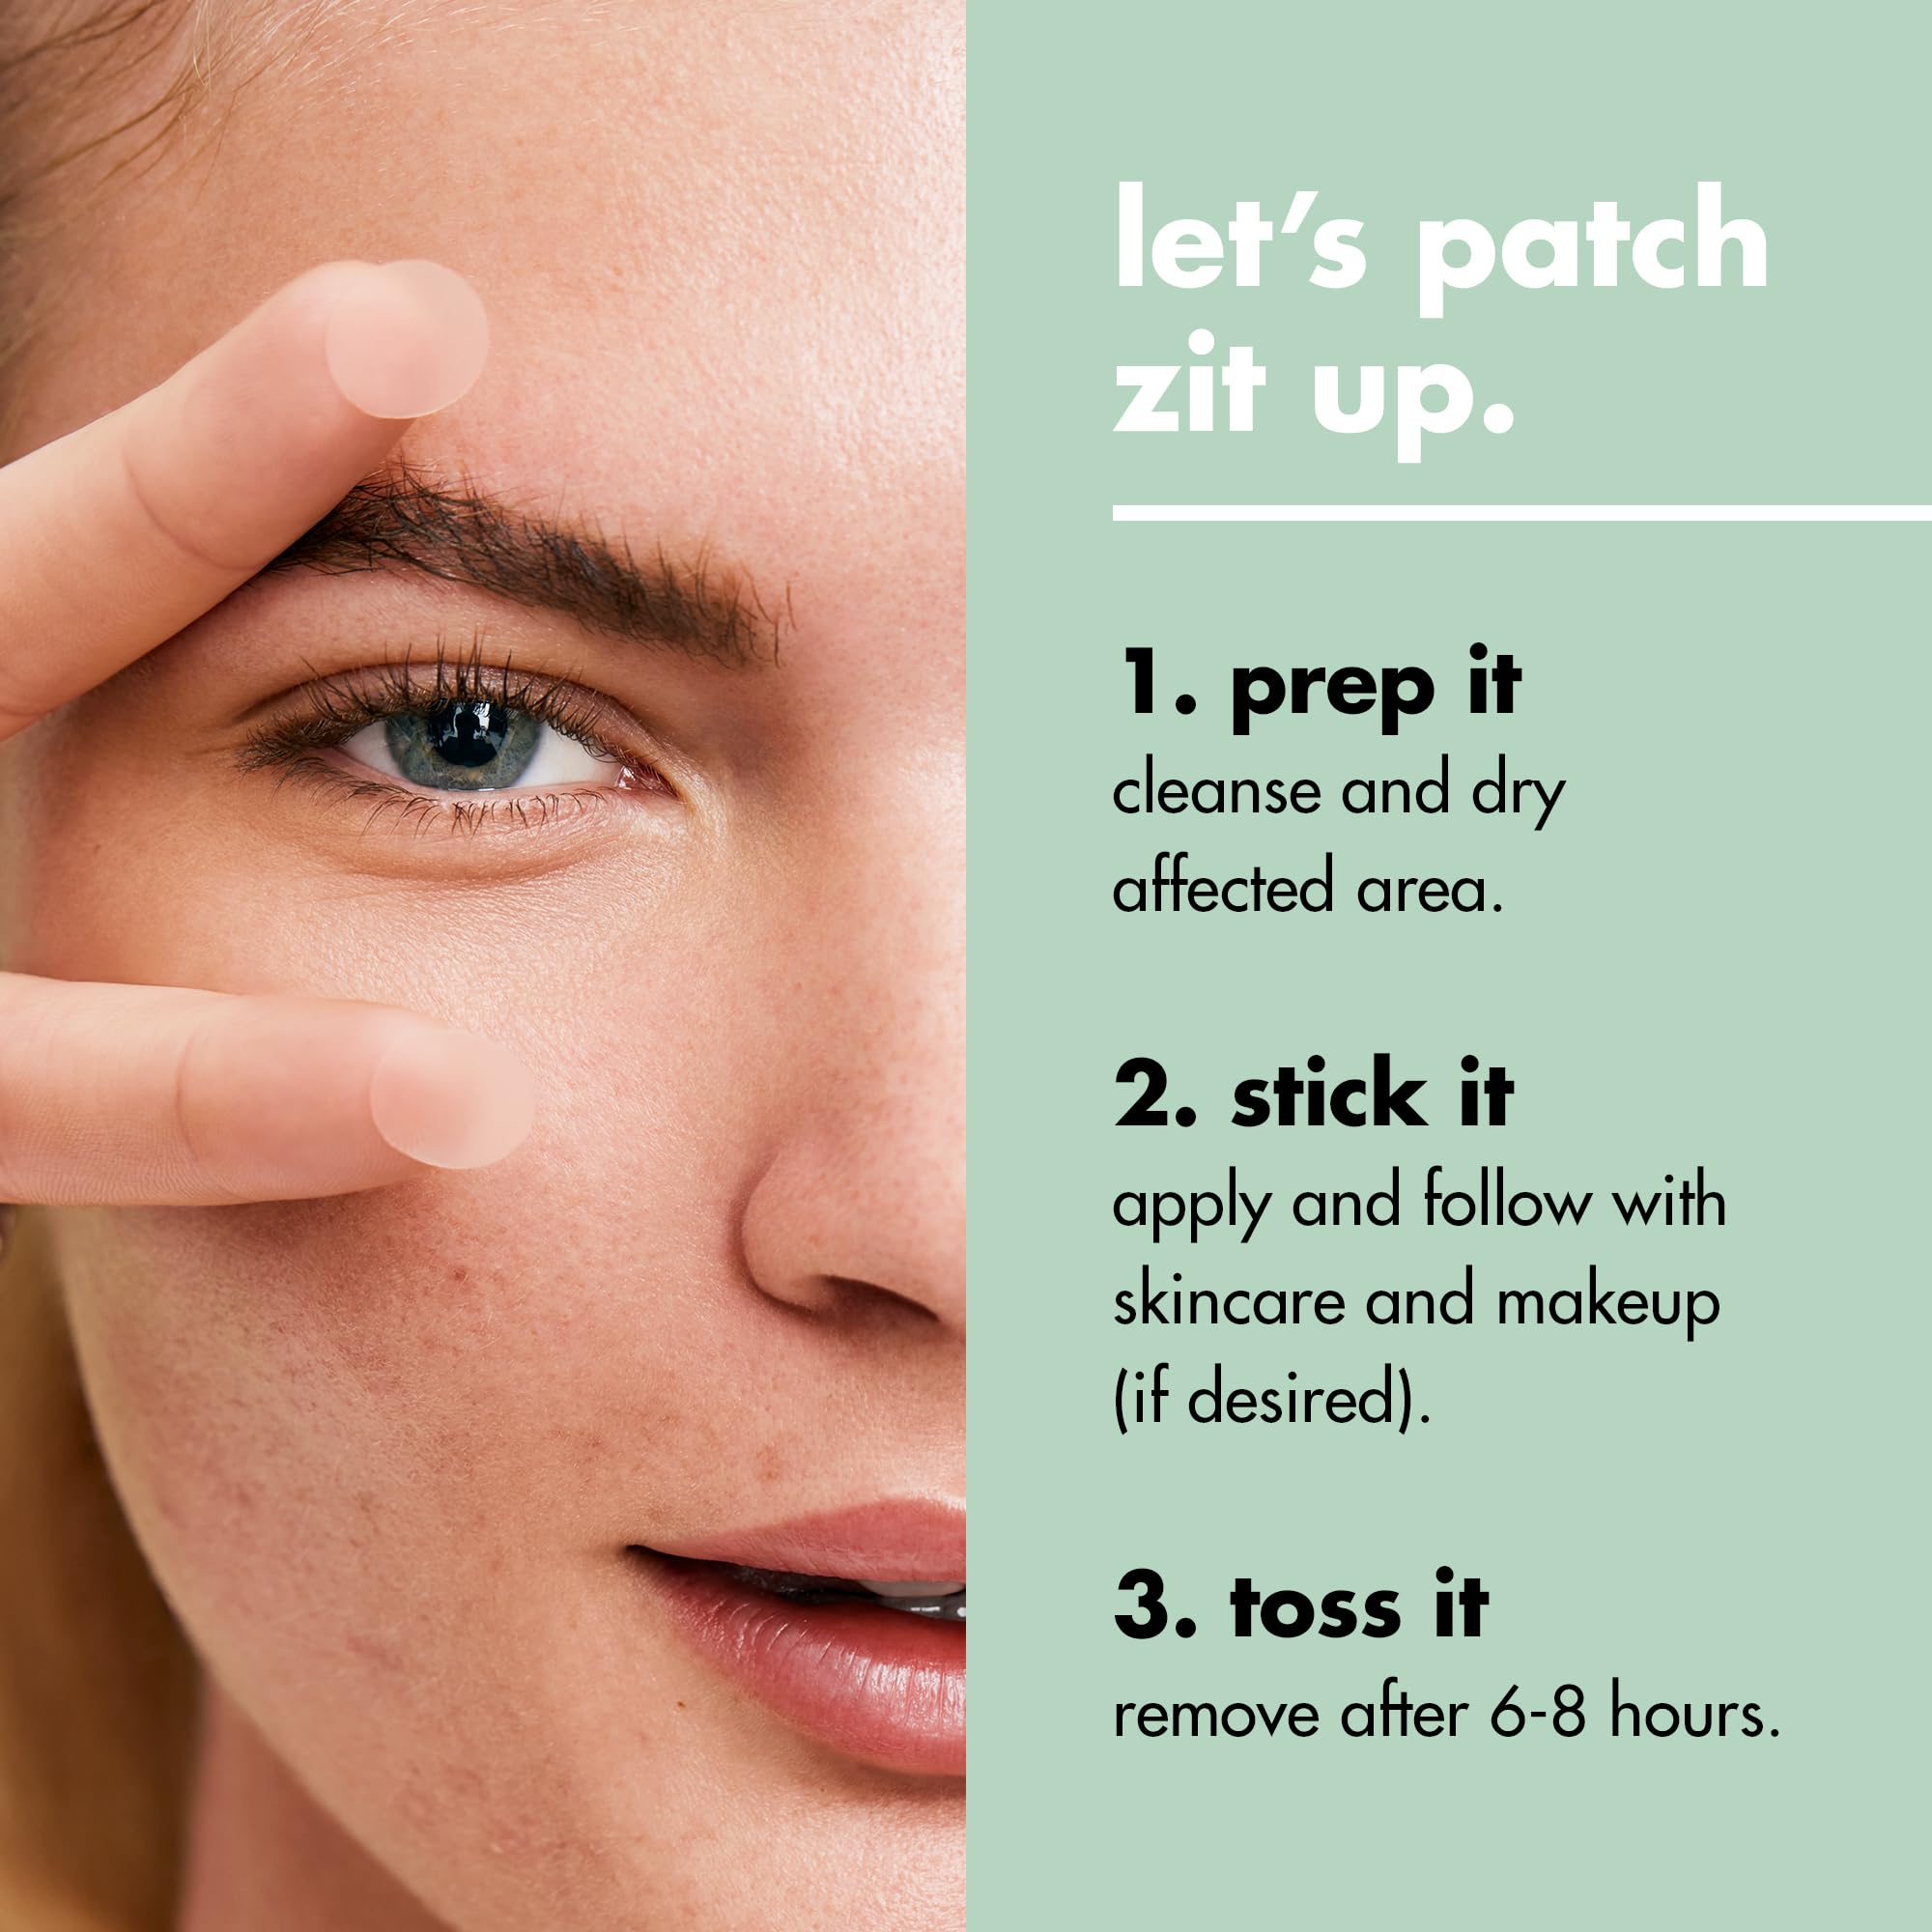 e.l.f. SKIN Blemish Breakthrough Stick It To Zits Pimple Patches, Helps Reduce The Look of Blemishes & Heal, Vegan & Cruelty-free, 36 Patches